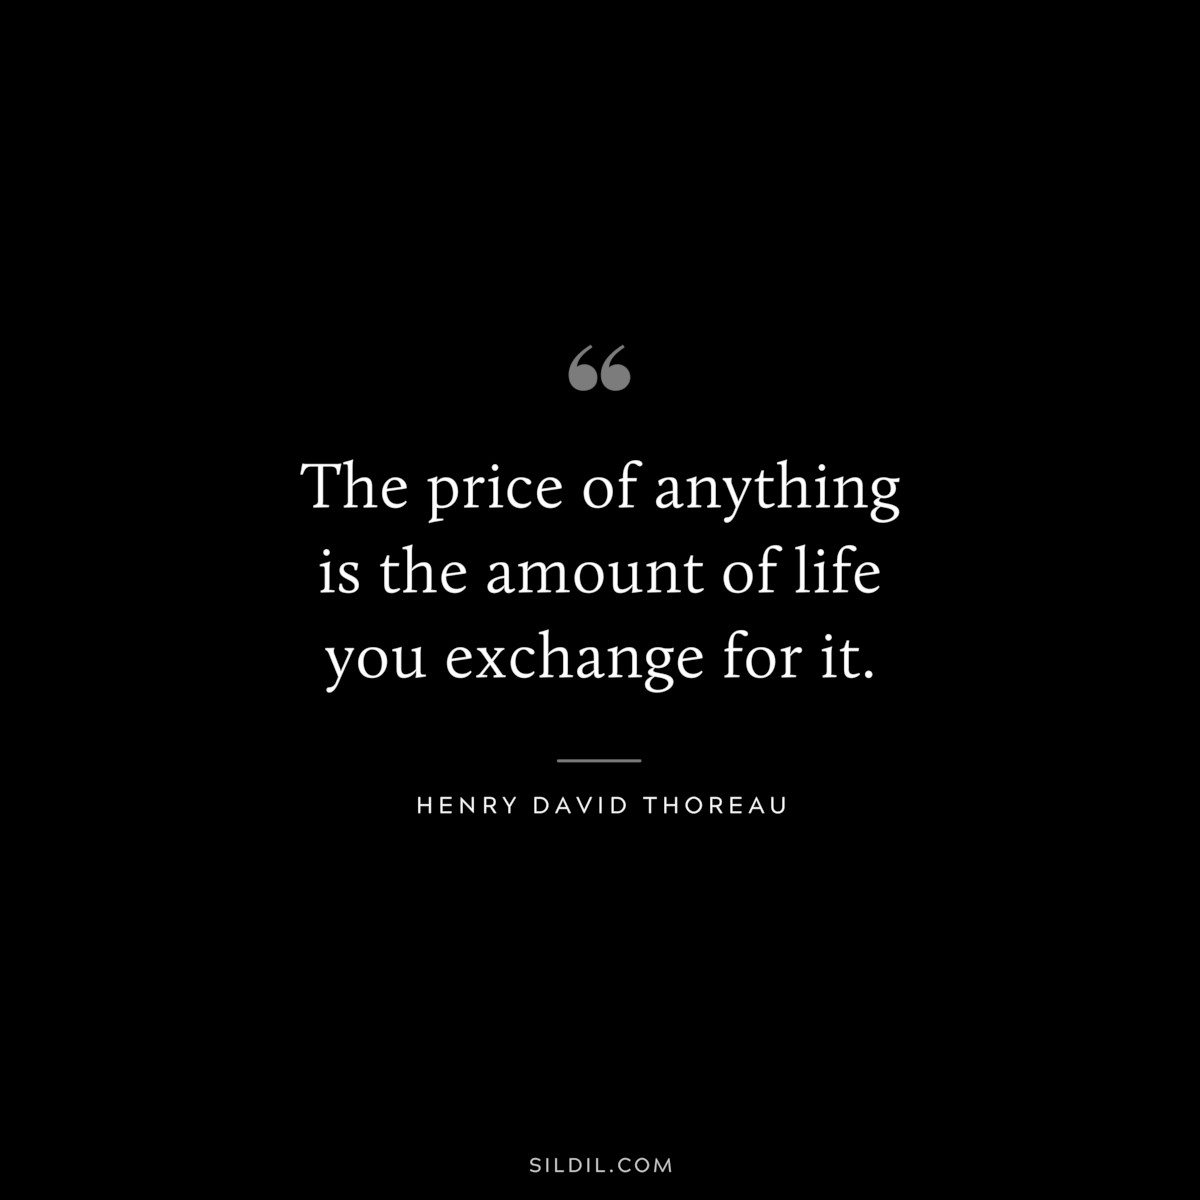 The price of anything is the amount of life you exchange for it. — Henry David Thoreau